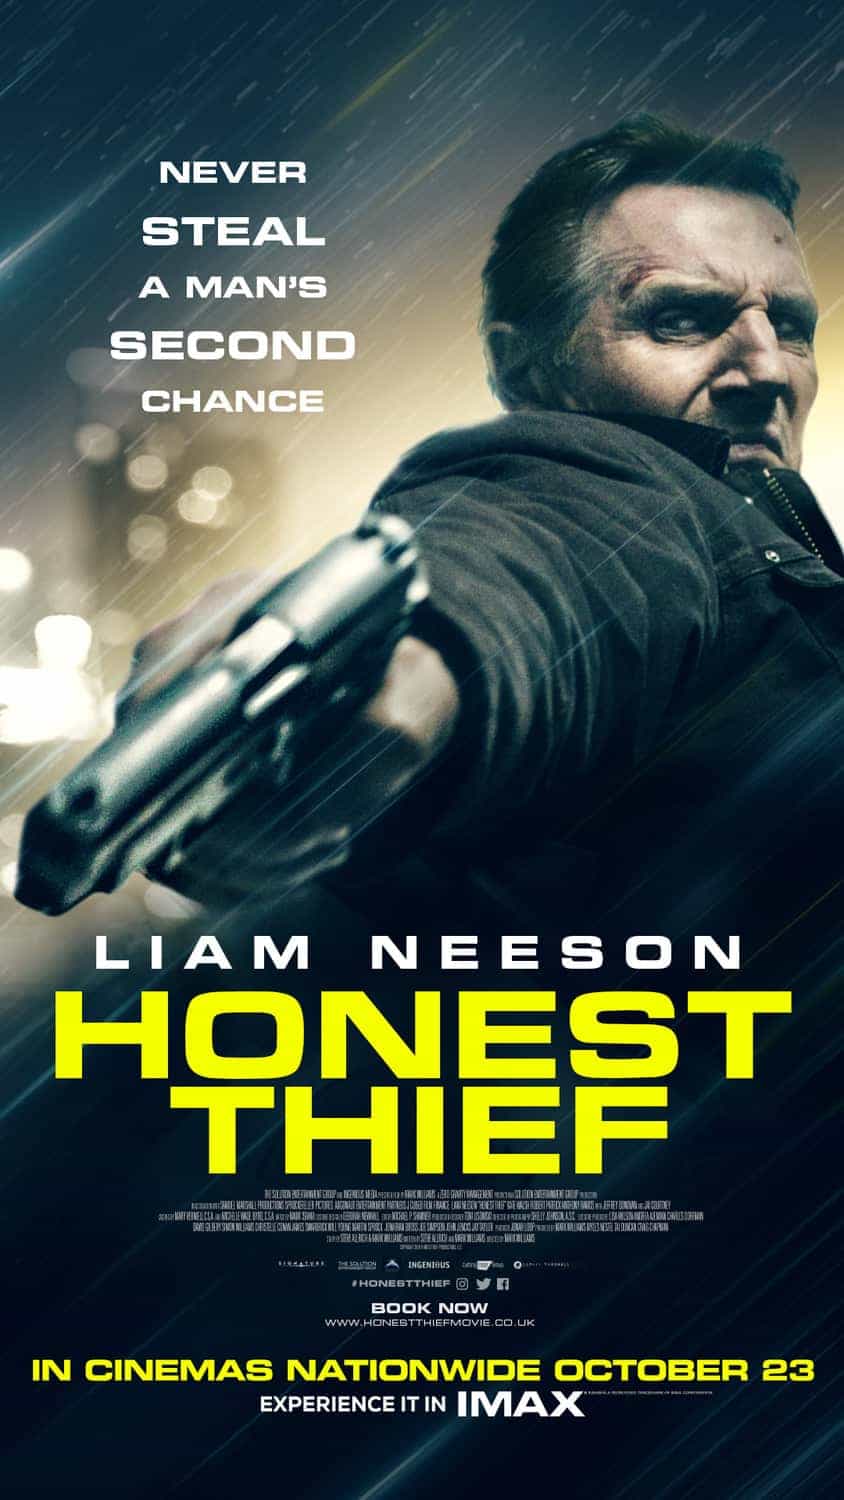 US Box Office Weekend Report 23rd - 25th October 2020:  Honst Thief remains at the top of the US box office with The Empty Man the top new movie at 4